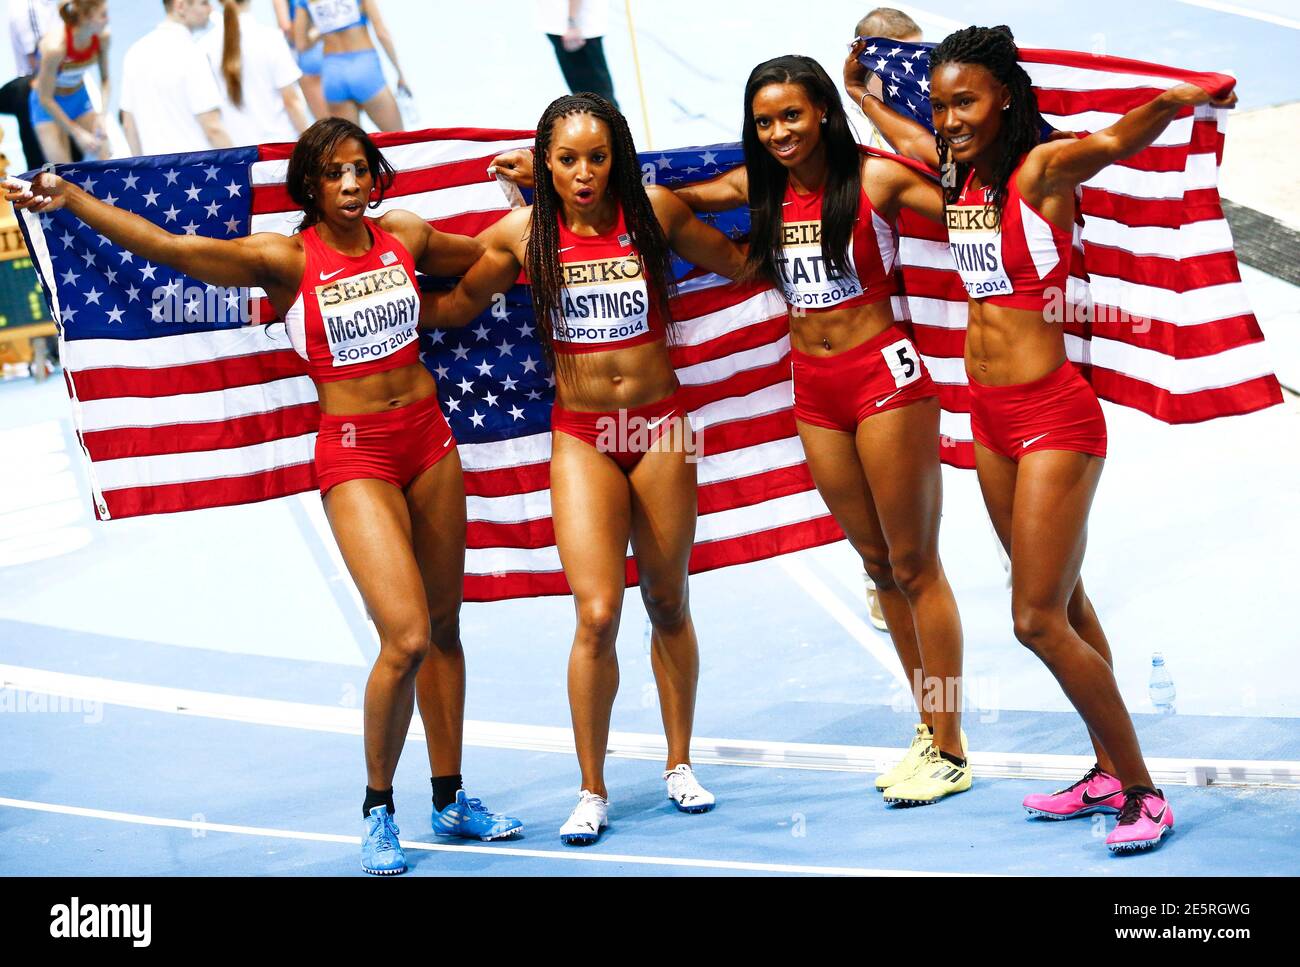 First placed U.S. athletes Francena McCorory, Natasha Hastings, Cassandra  Tate and Joanna Atkins (L-R) pose as they celebrate after the women's 4x400  metres relay final at the world indoor athletics championships at